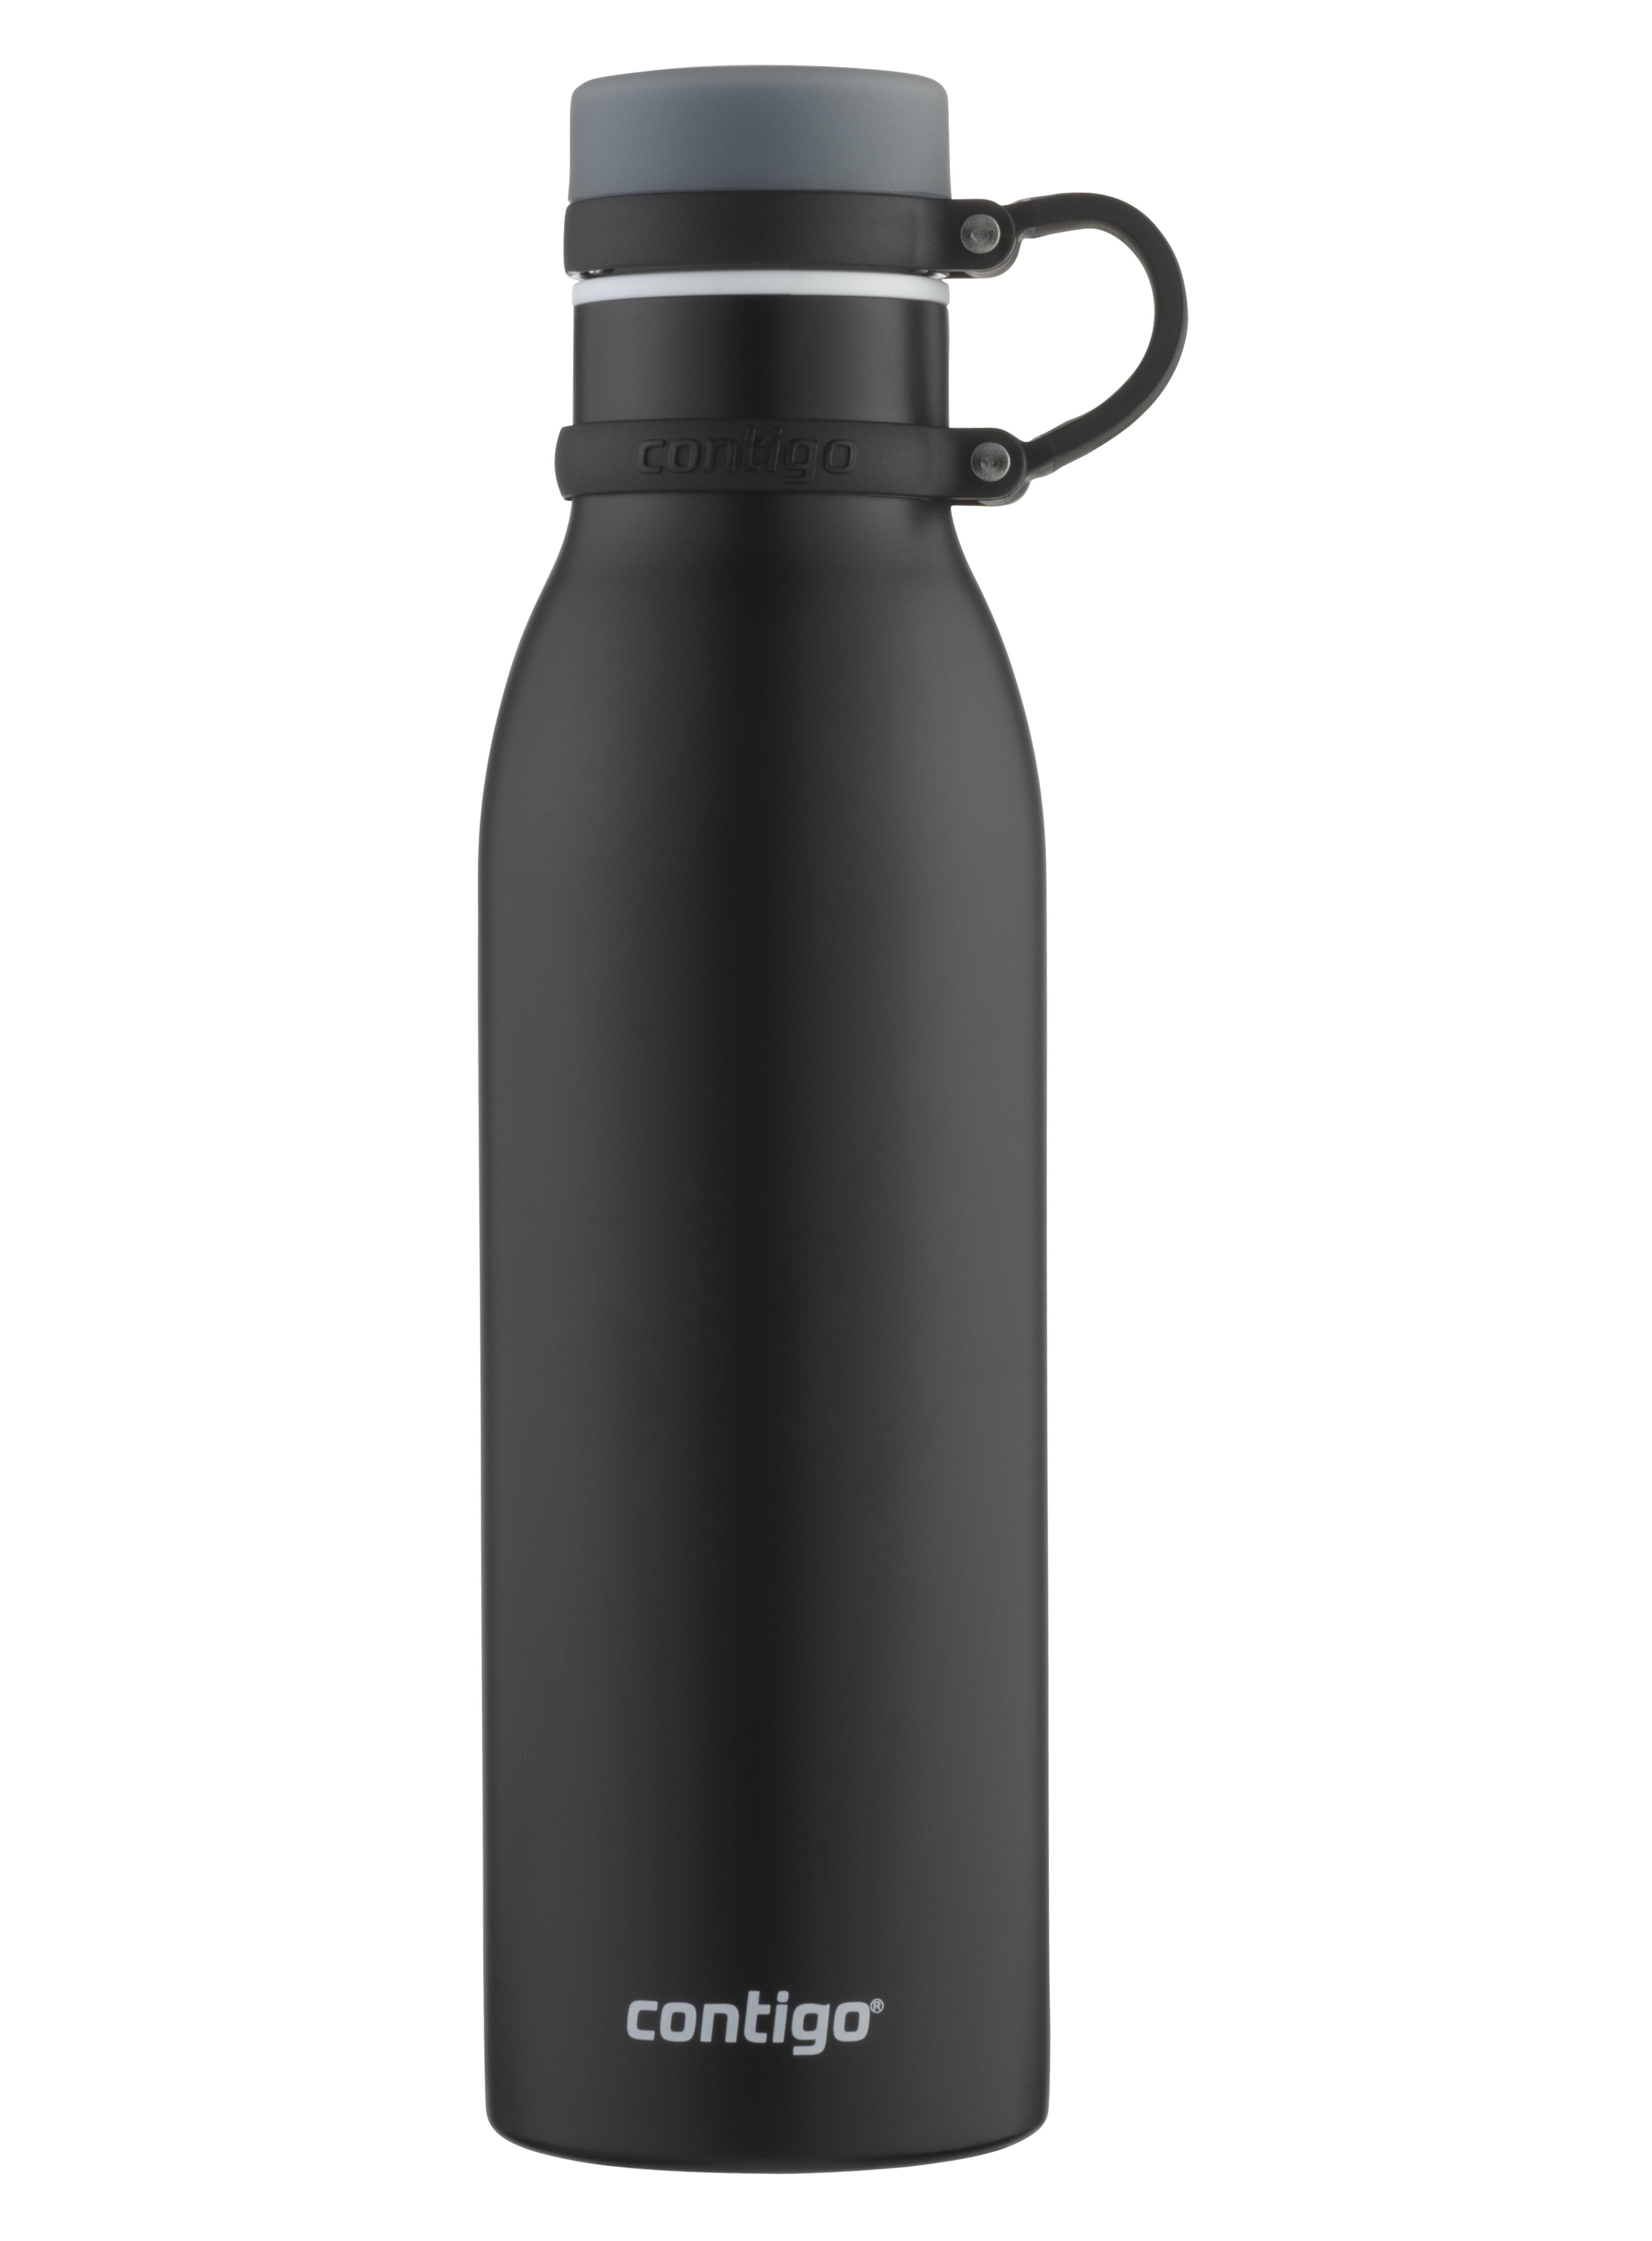 Stainless Steel Water Bottle Pop Up Vacuum Insulated Portable for Sports Easy to Open Thermos Cup Contigo Water Bottle Steel Water Bottle Black